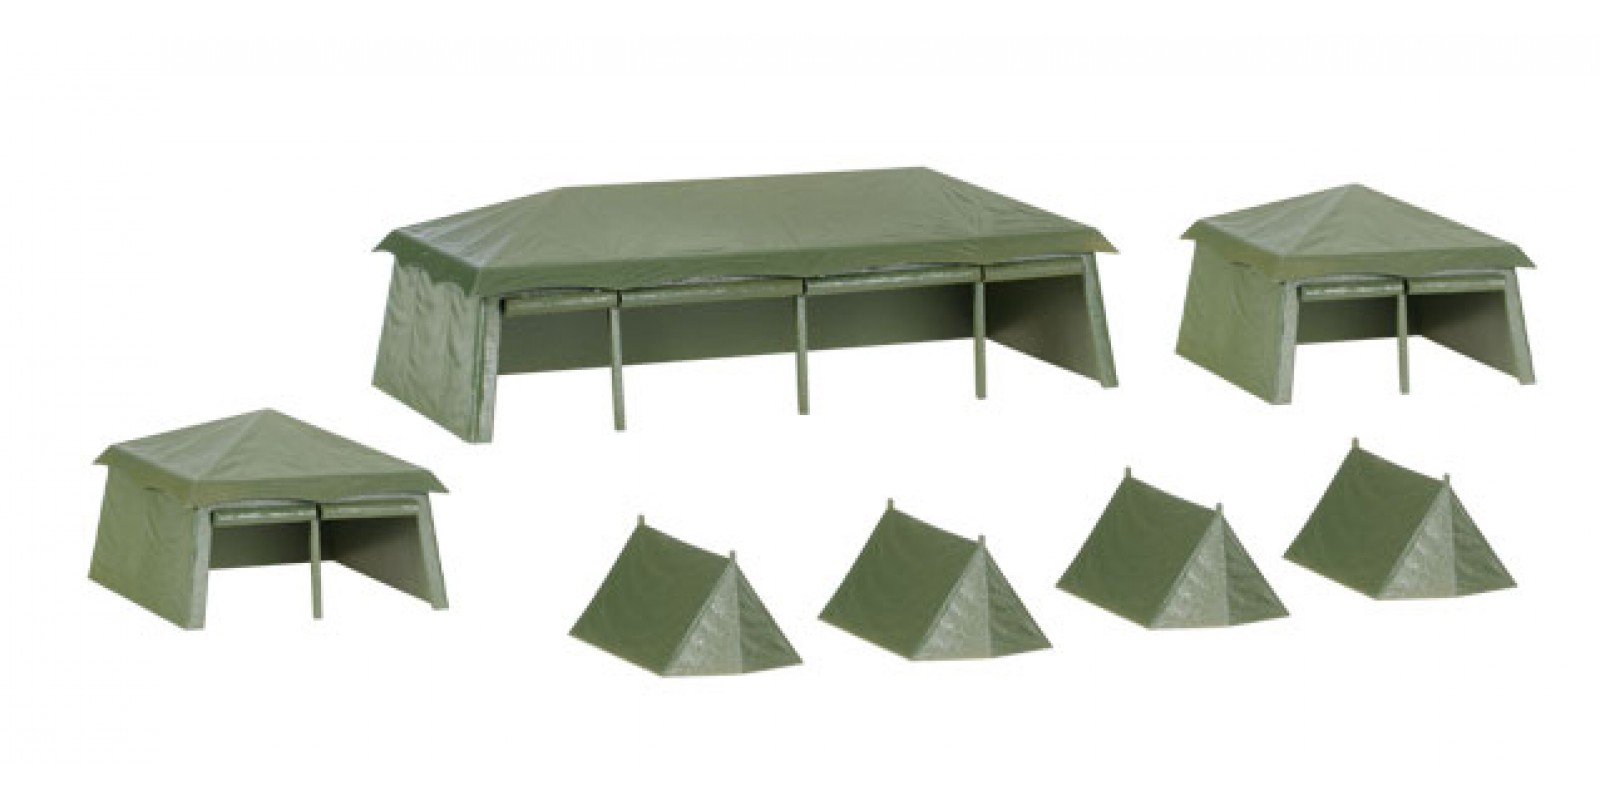 HR745826  Herpa Military: Assembly kit tents (7 pieces)